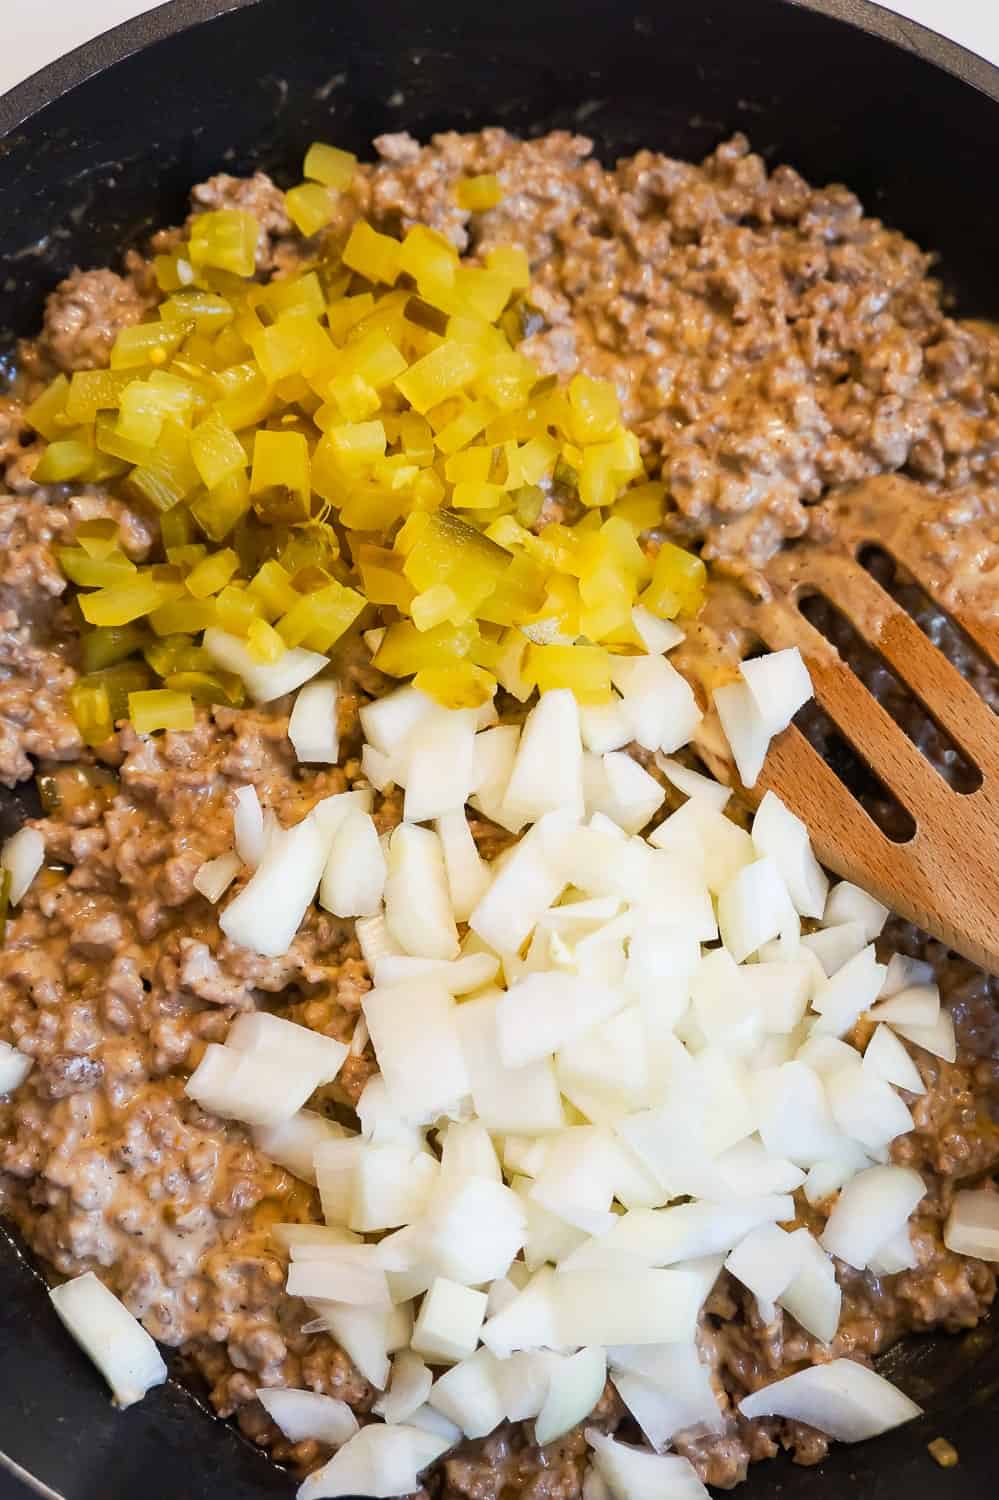 diced pickles and diced onions on top of ground beef mixture on a frying pan